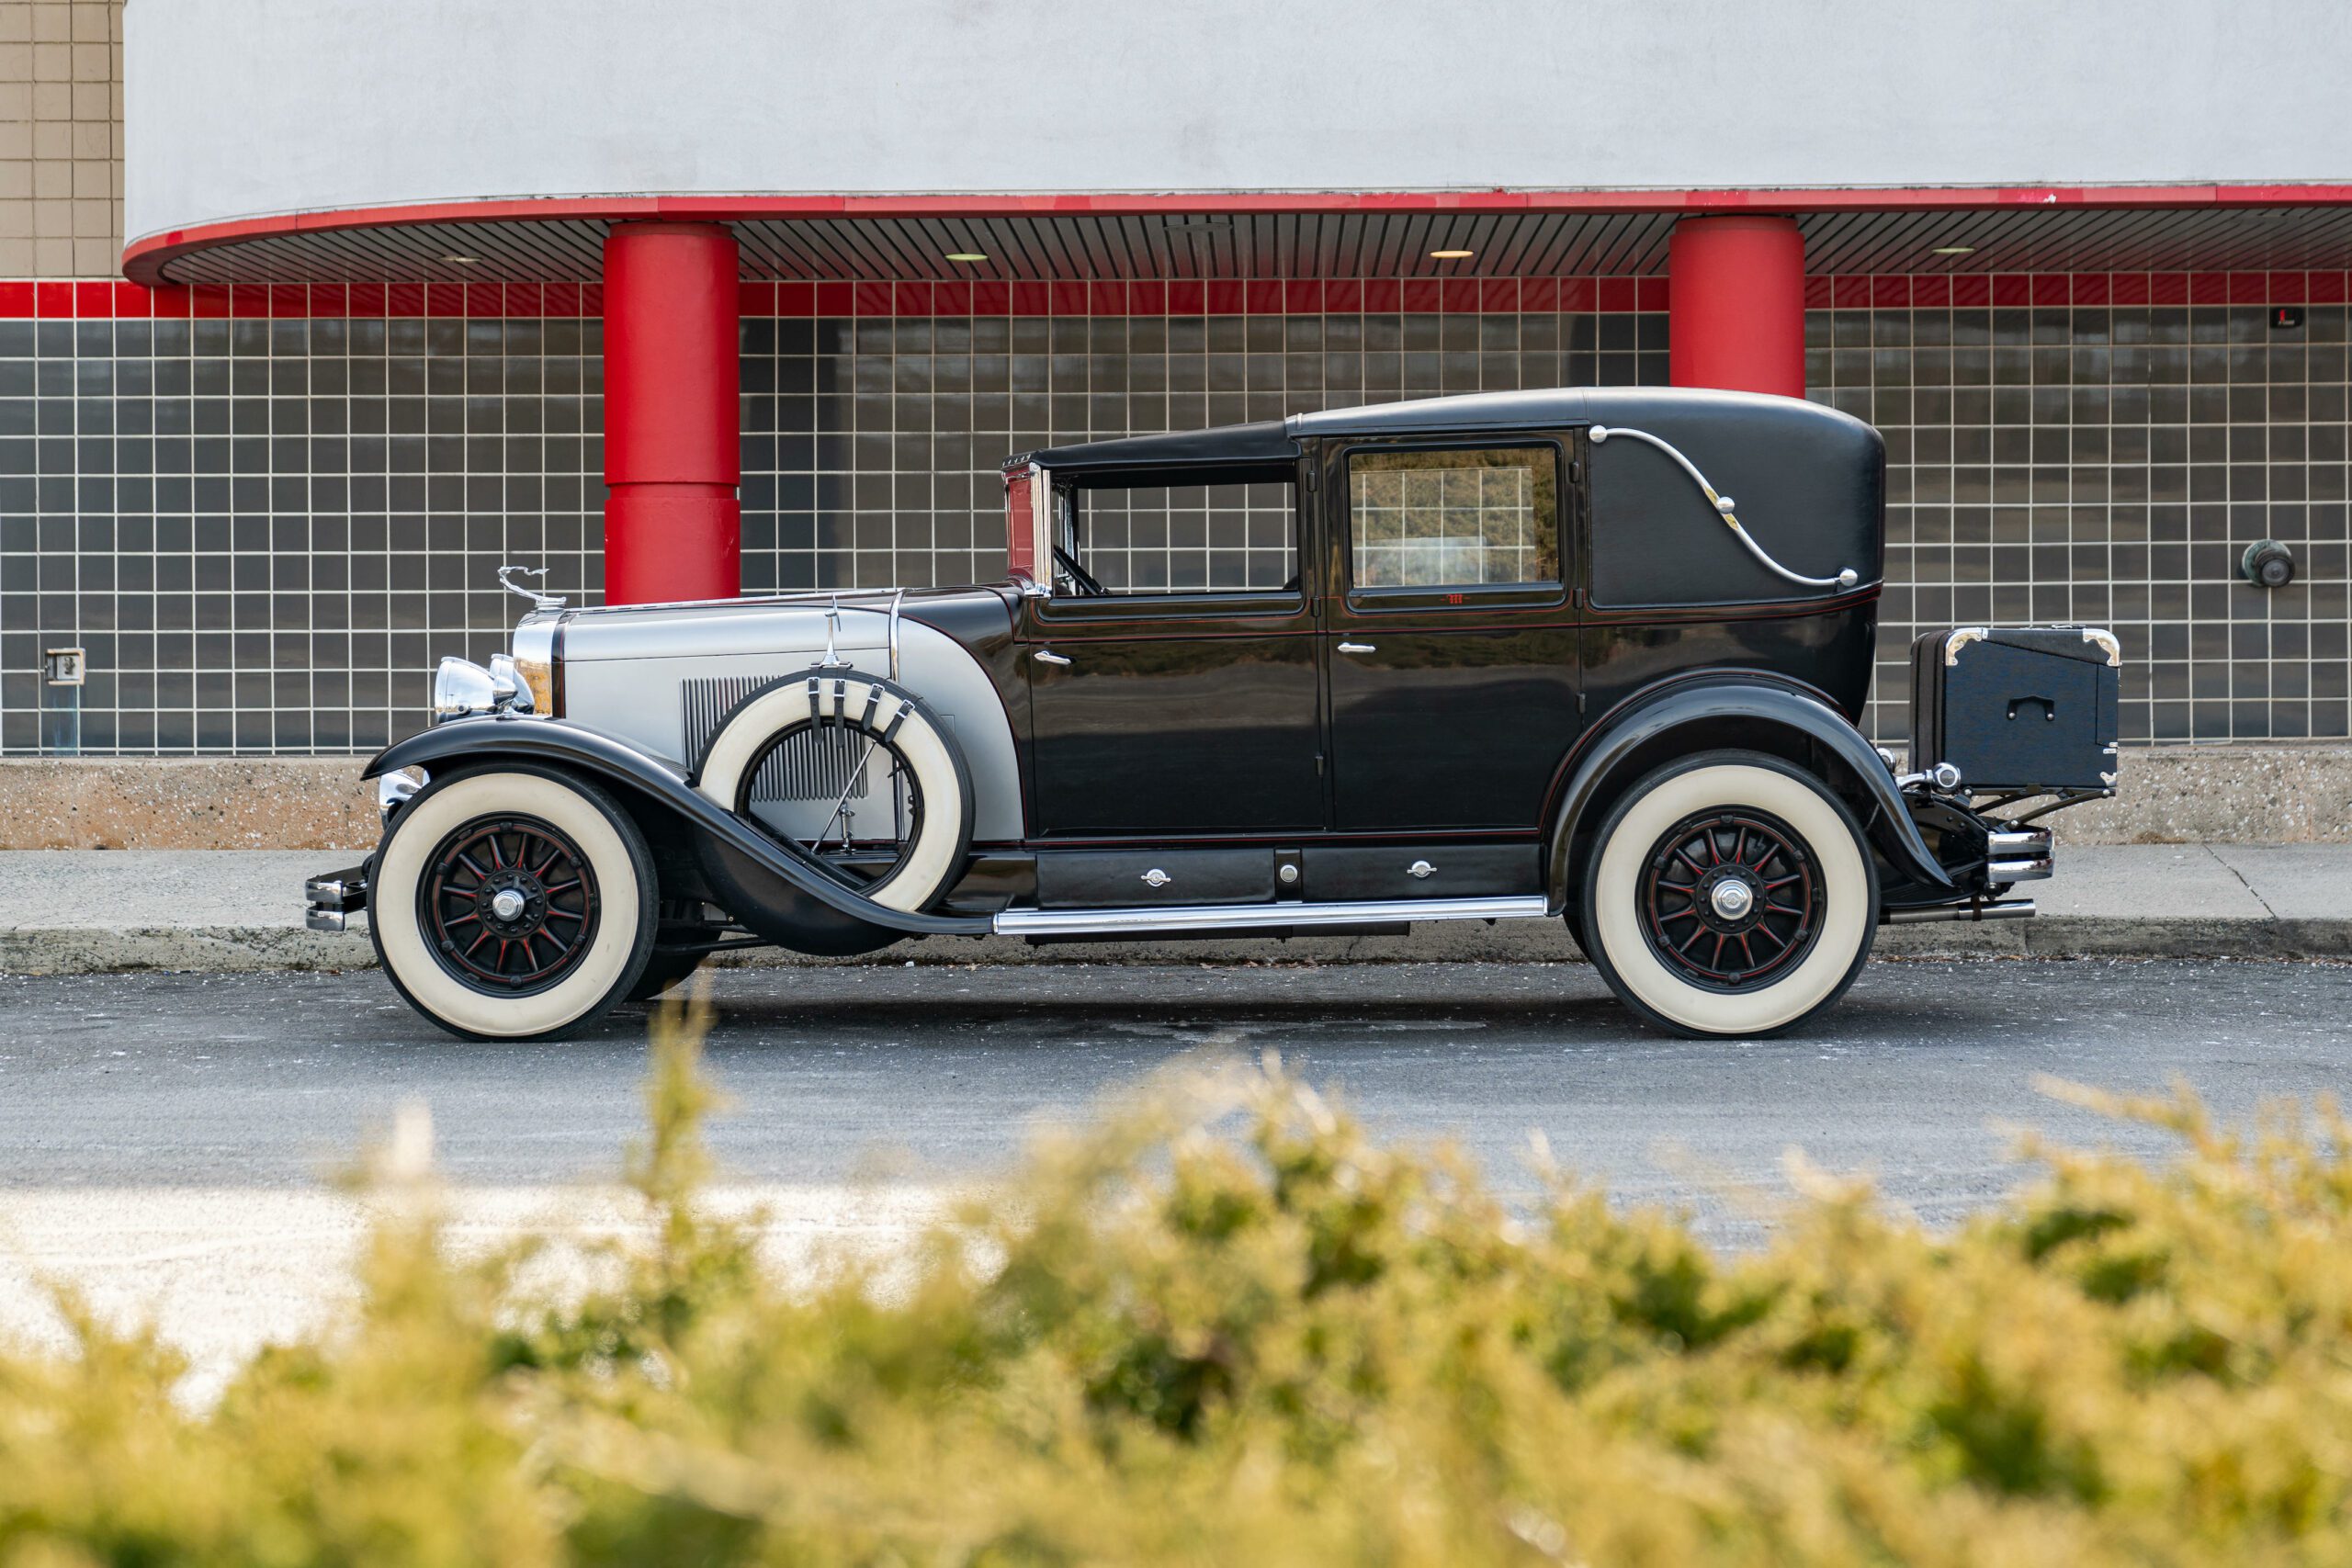 1929 Cadillac Series 341-B V-8 Transformable Town Cabriolet